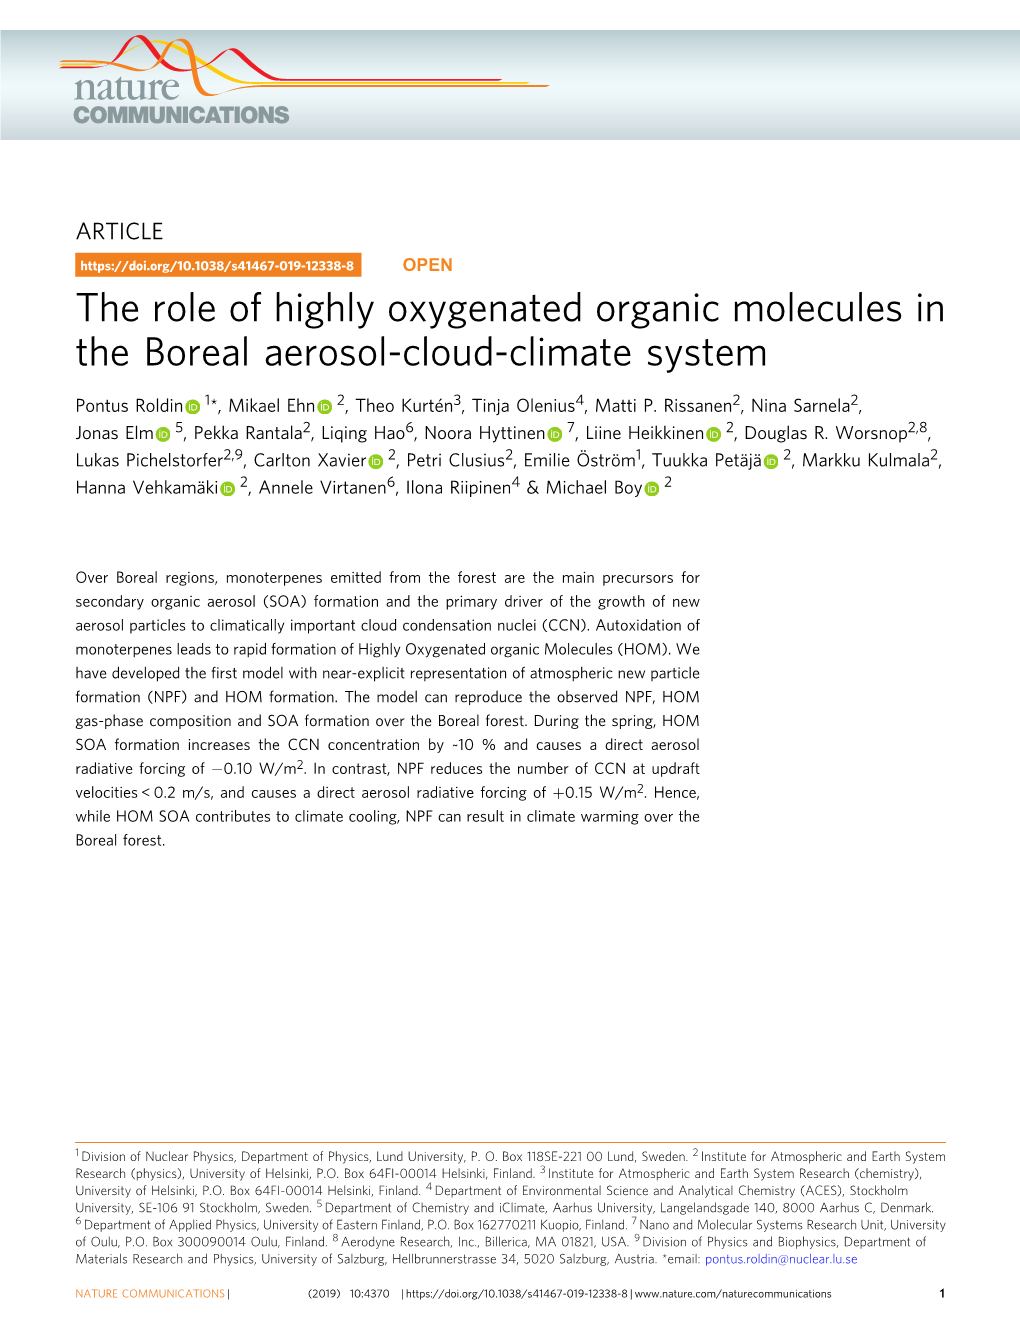 The Role of Highly Oxygenated Organic Molecules in the Boreal Aerosol-Cloud-Climate System